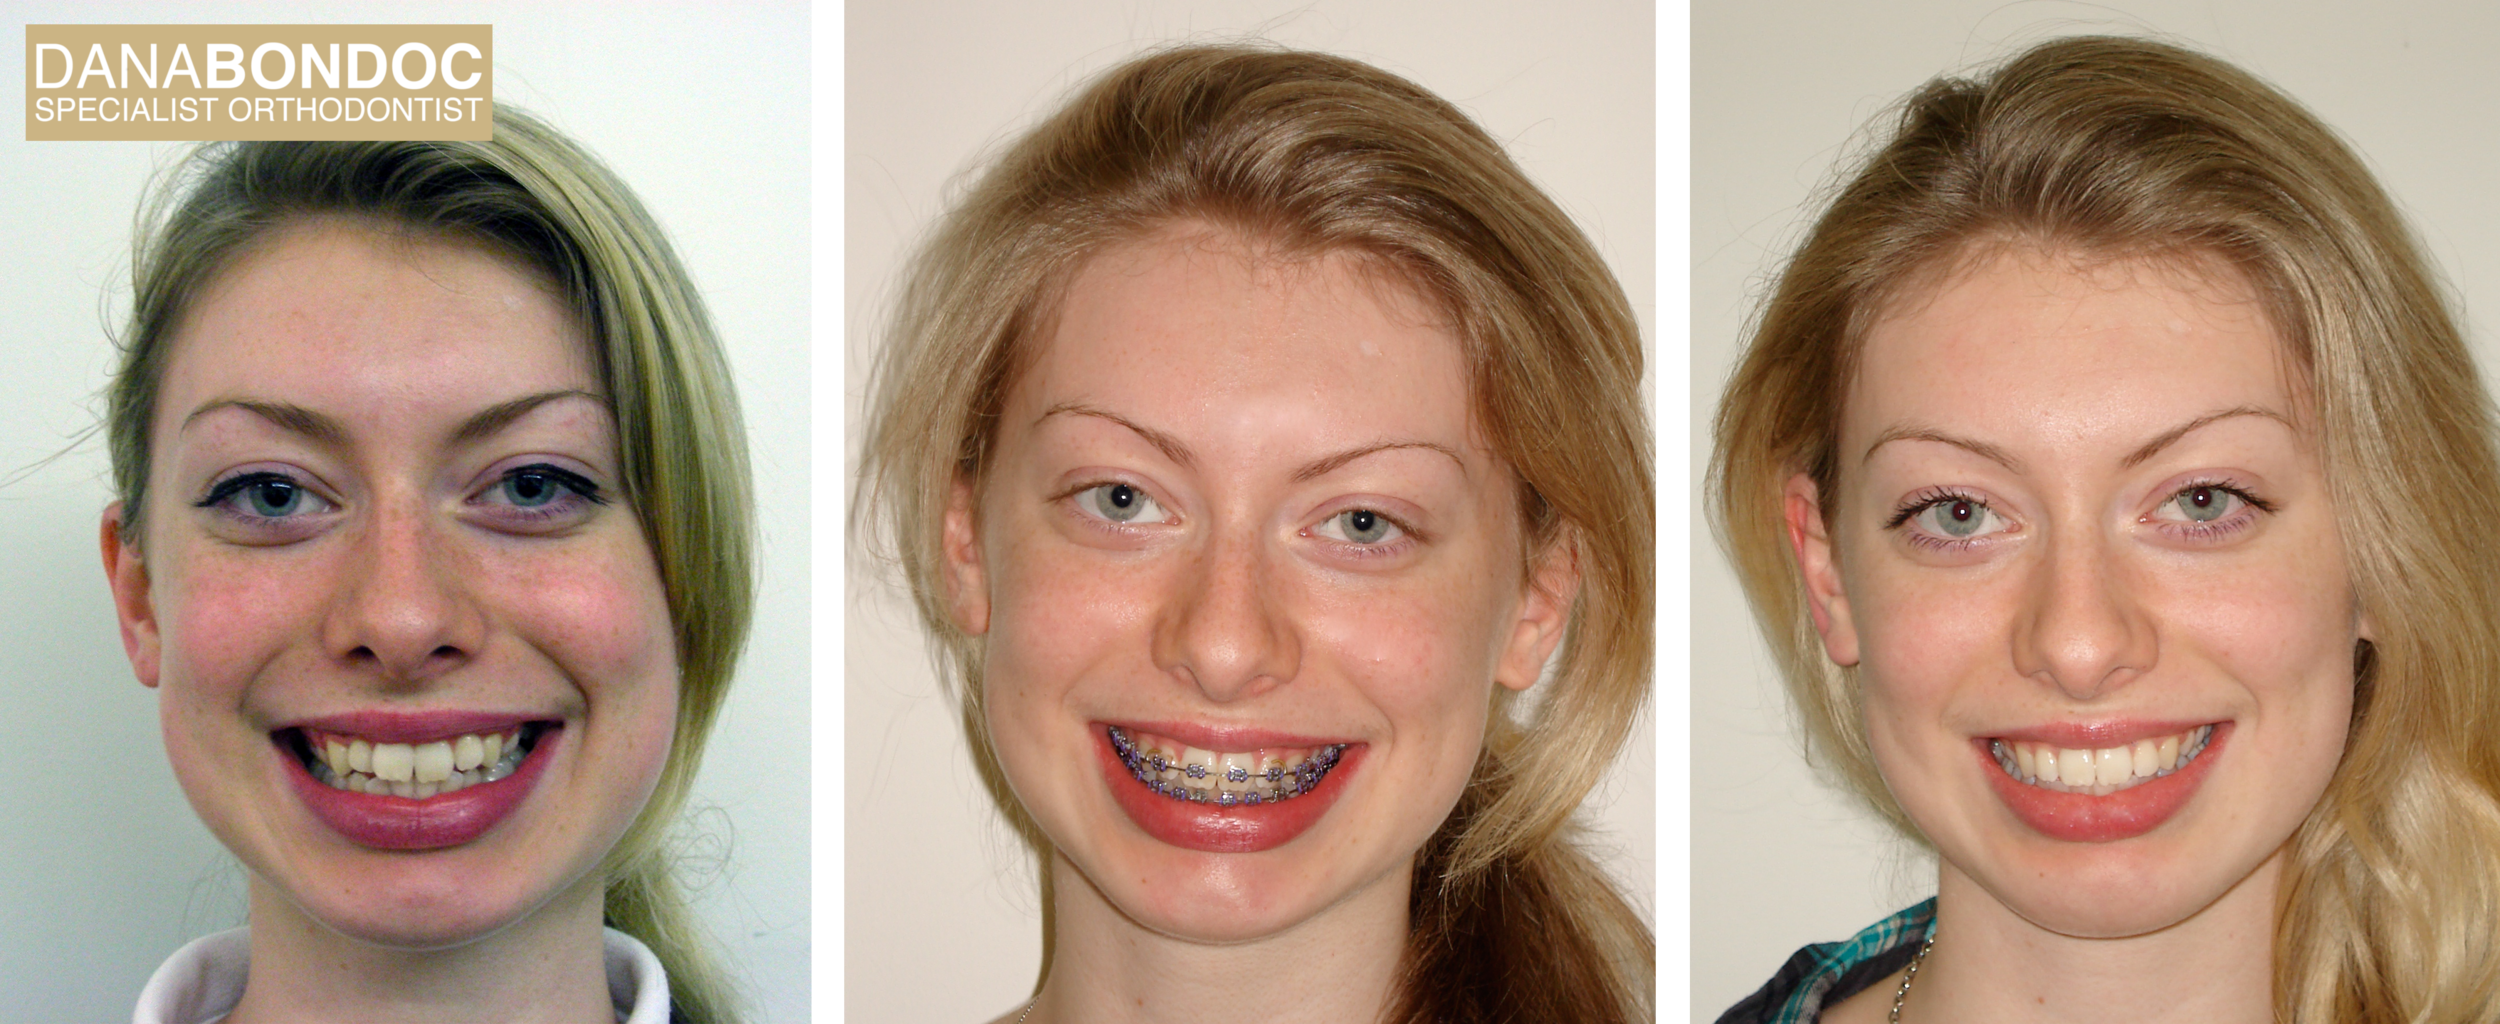 Non-extraction treatment, Before treatment, with metal braces on, after treatment photos of a female teenager and written testimonial.